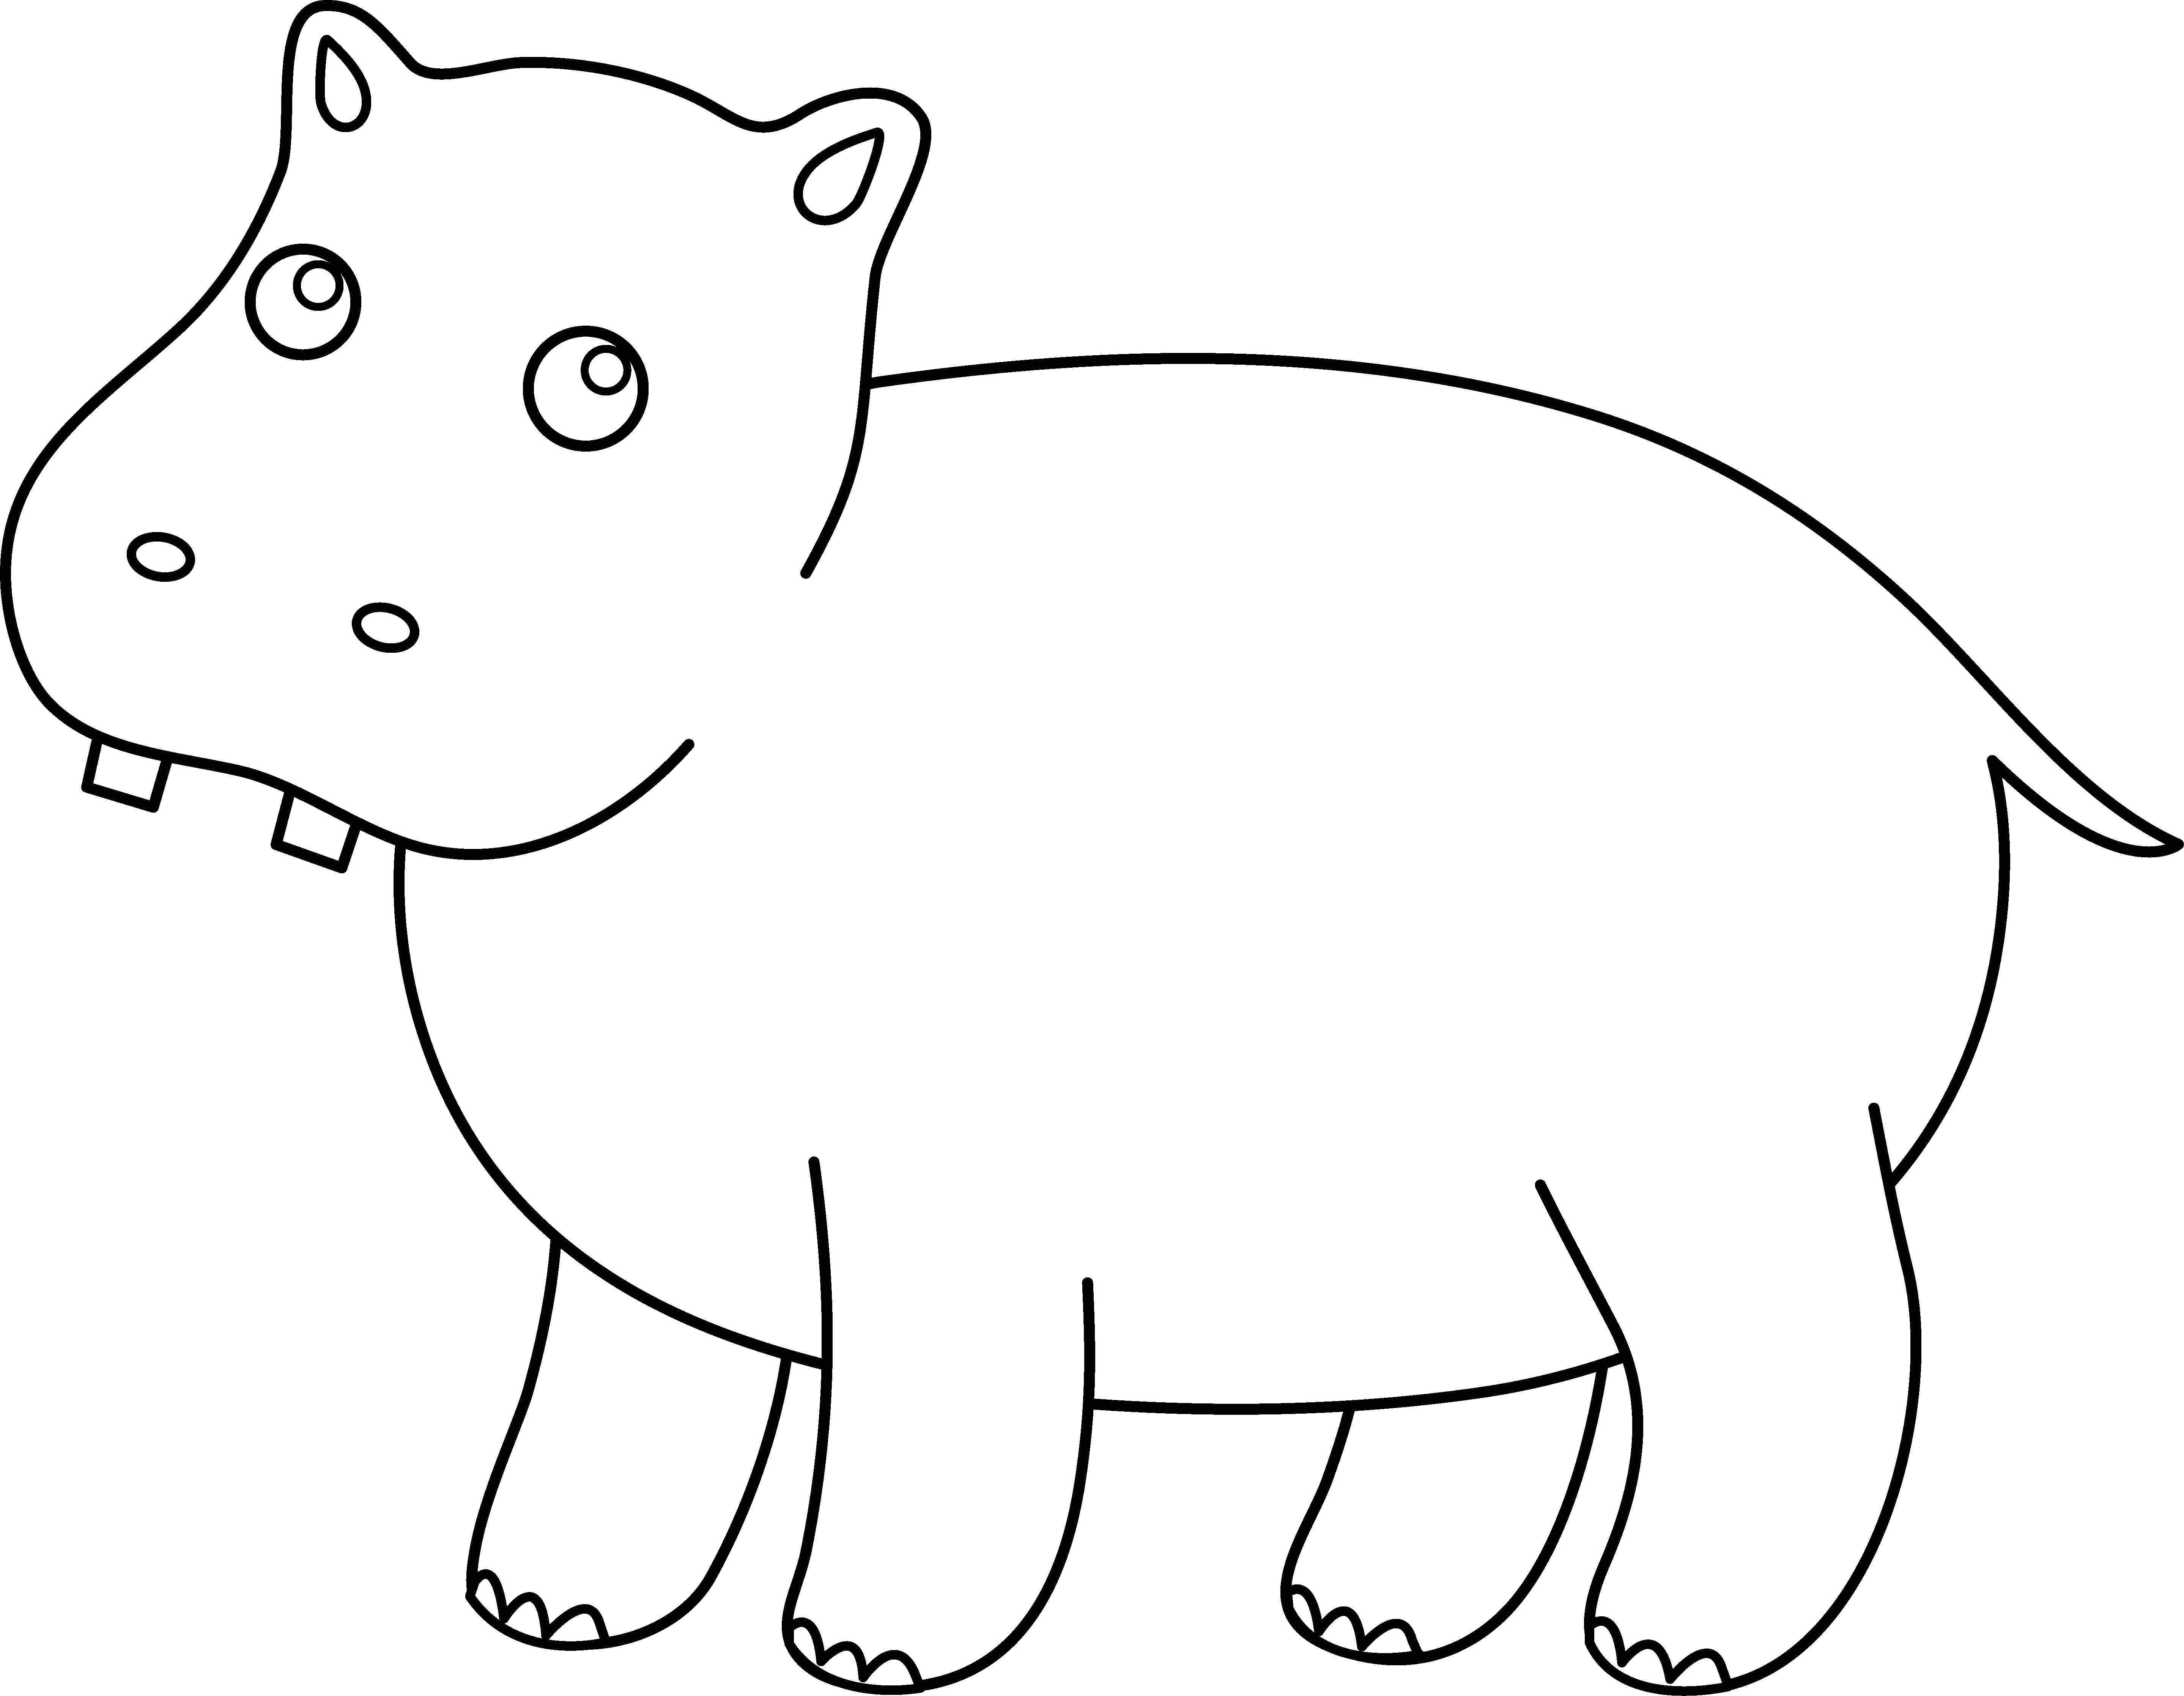 Coloring Contra baby Hippo. Category animals. Tags:  outline , Hippo teeth.